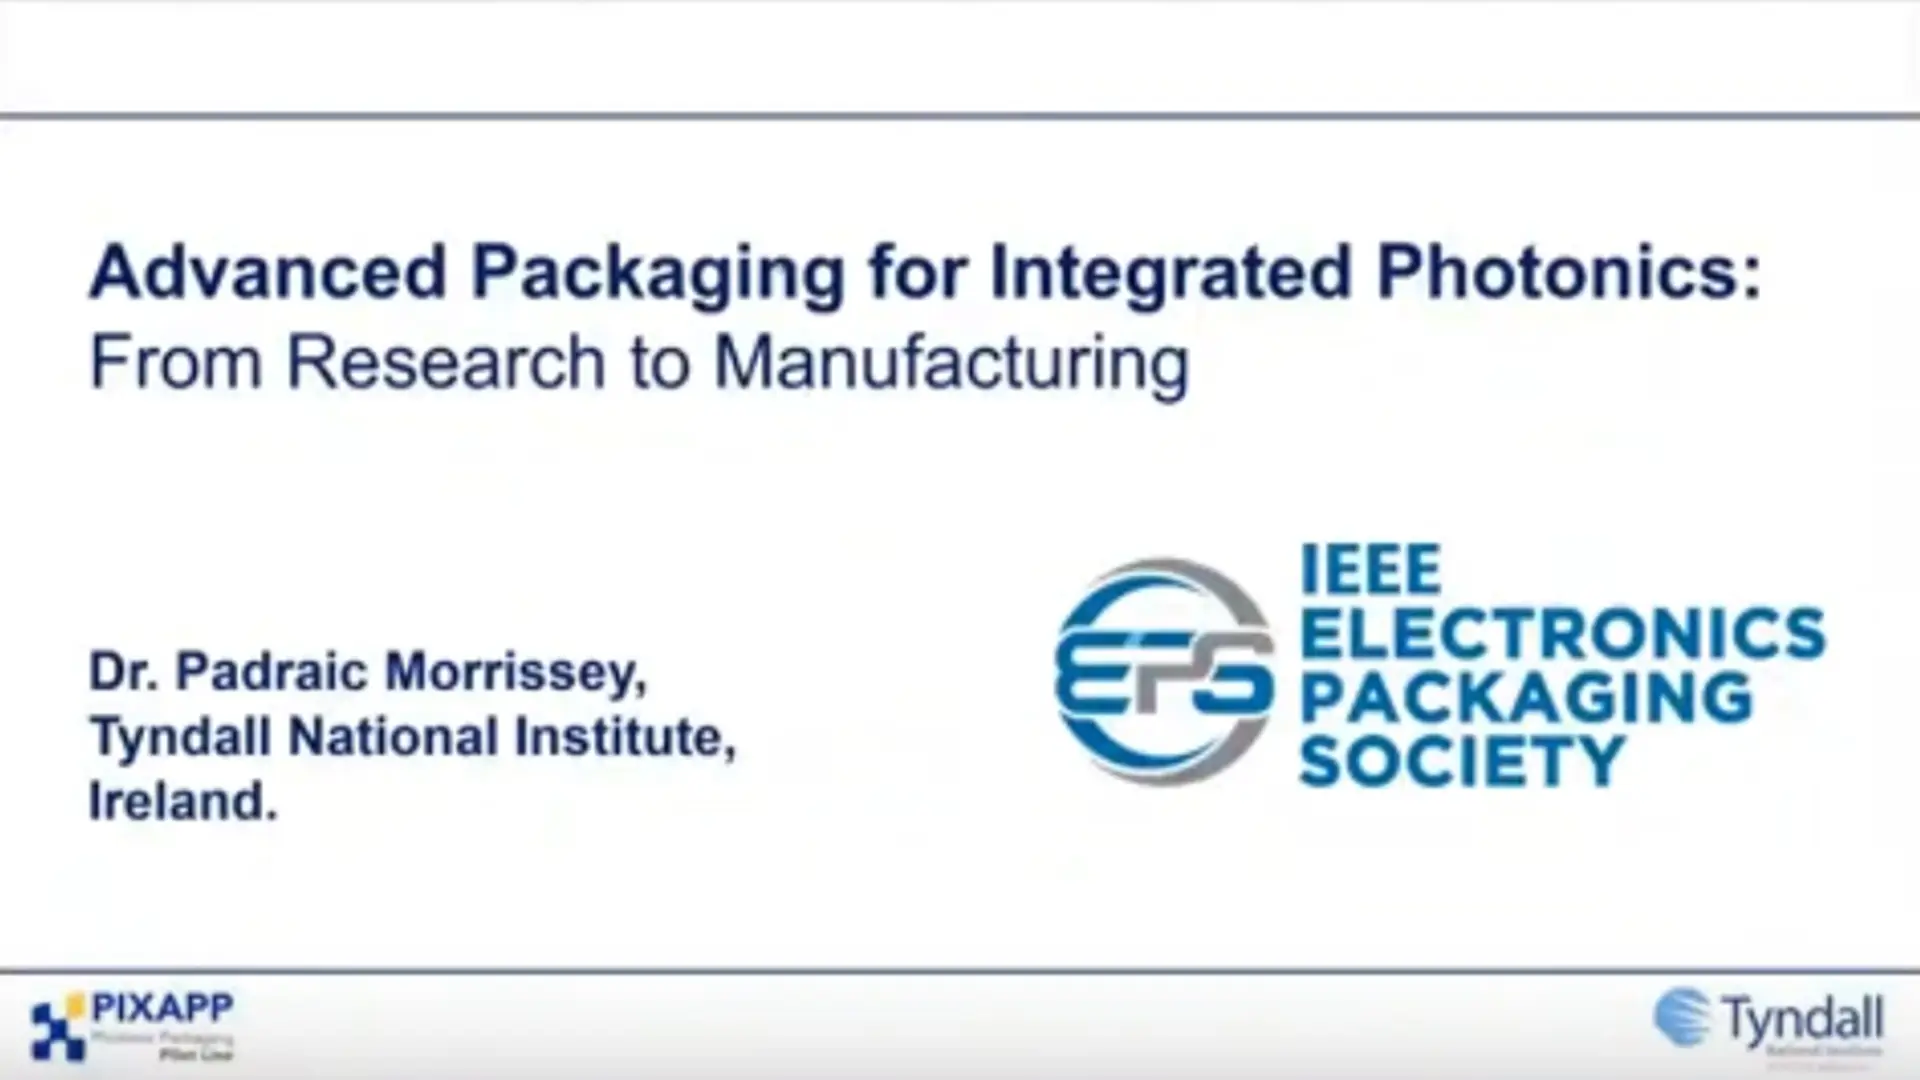 Advanced Packaging for Integrated Photonics: From Research to Manufacturing Video